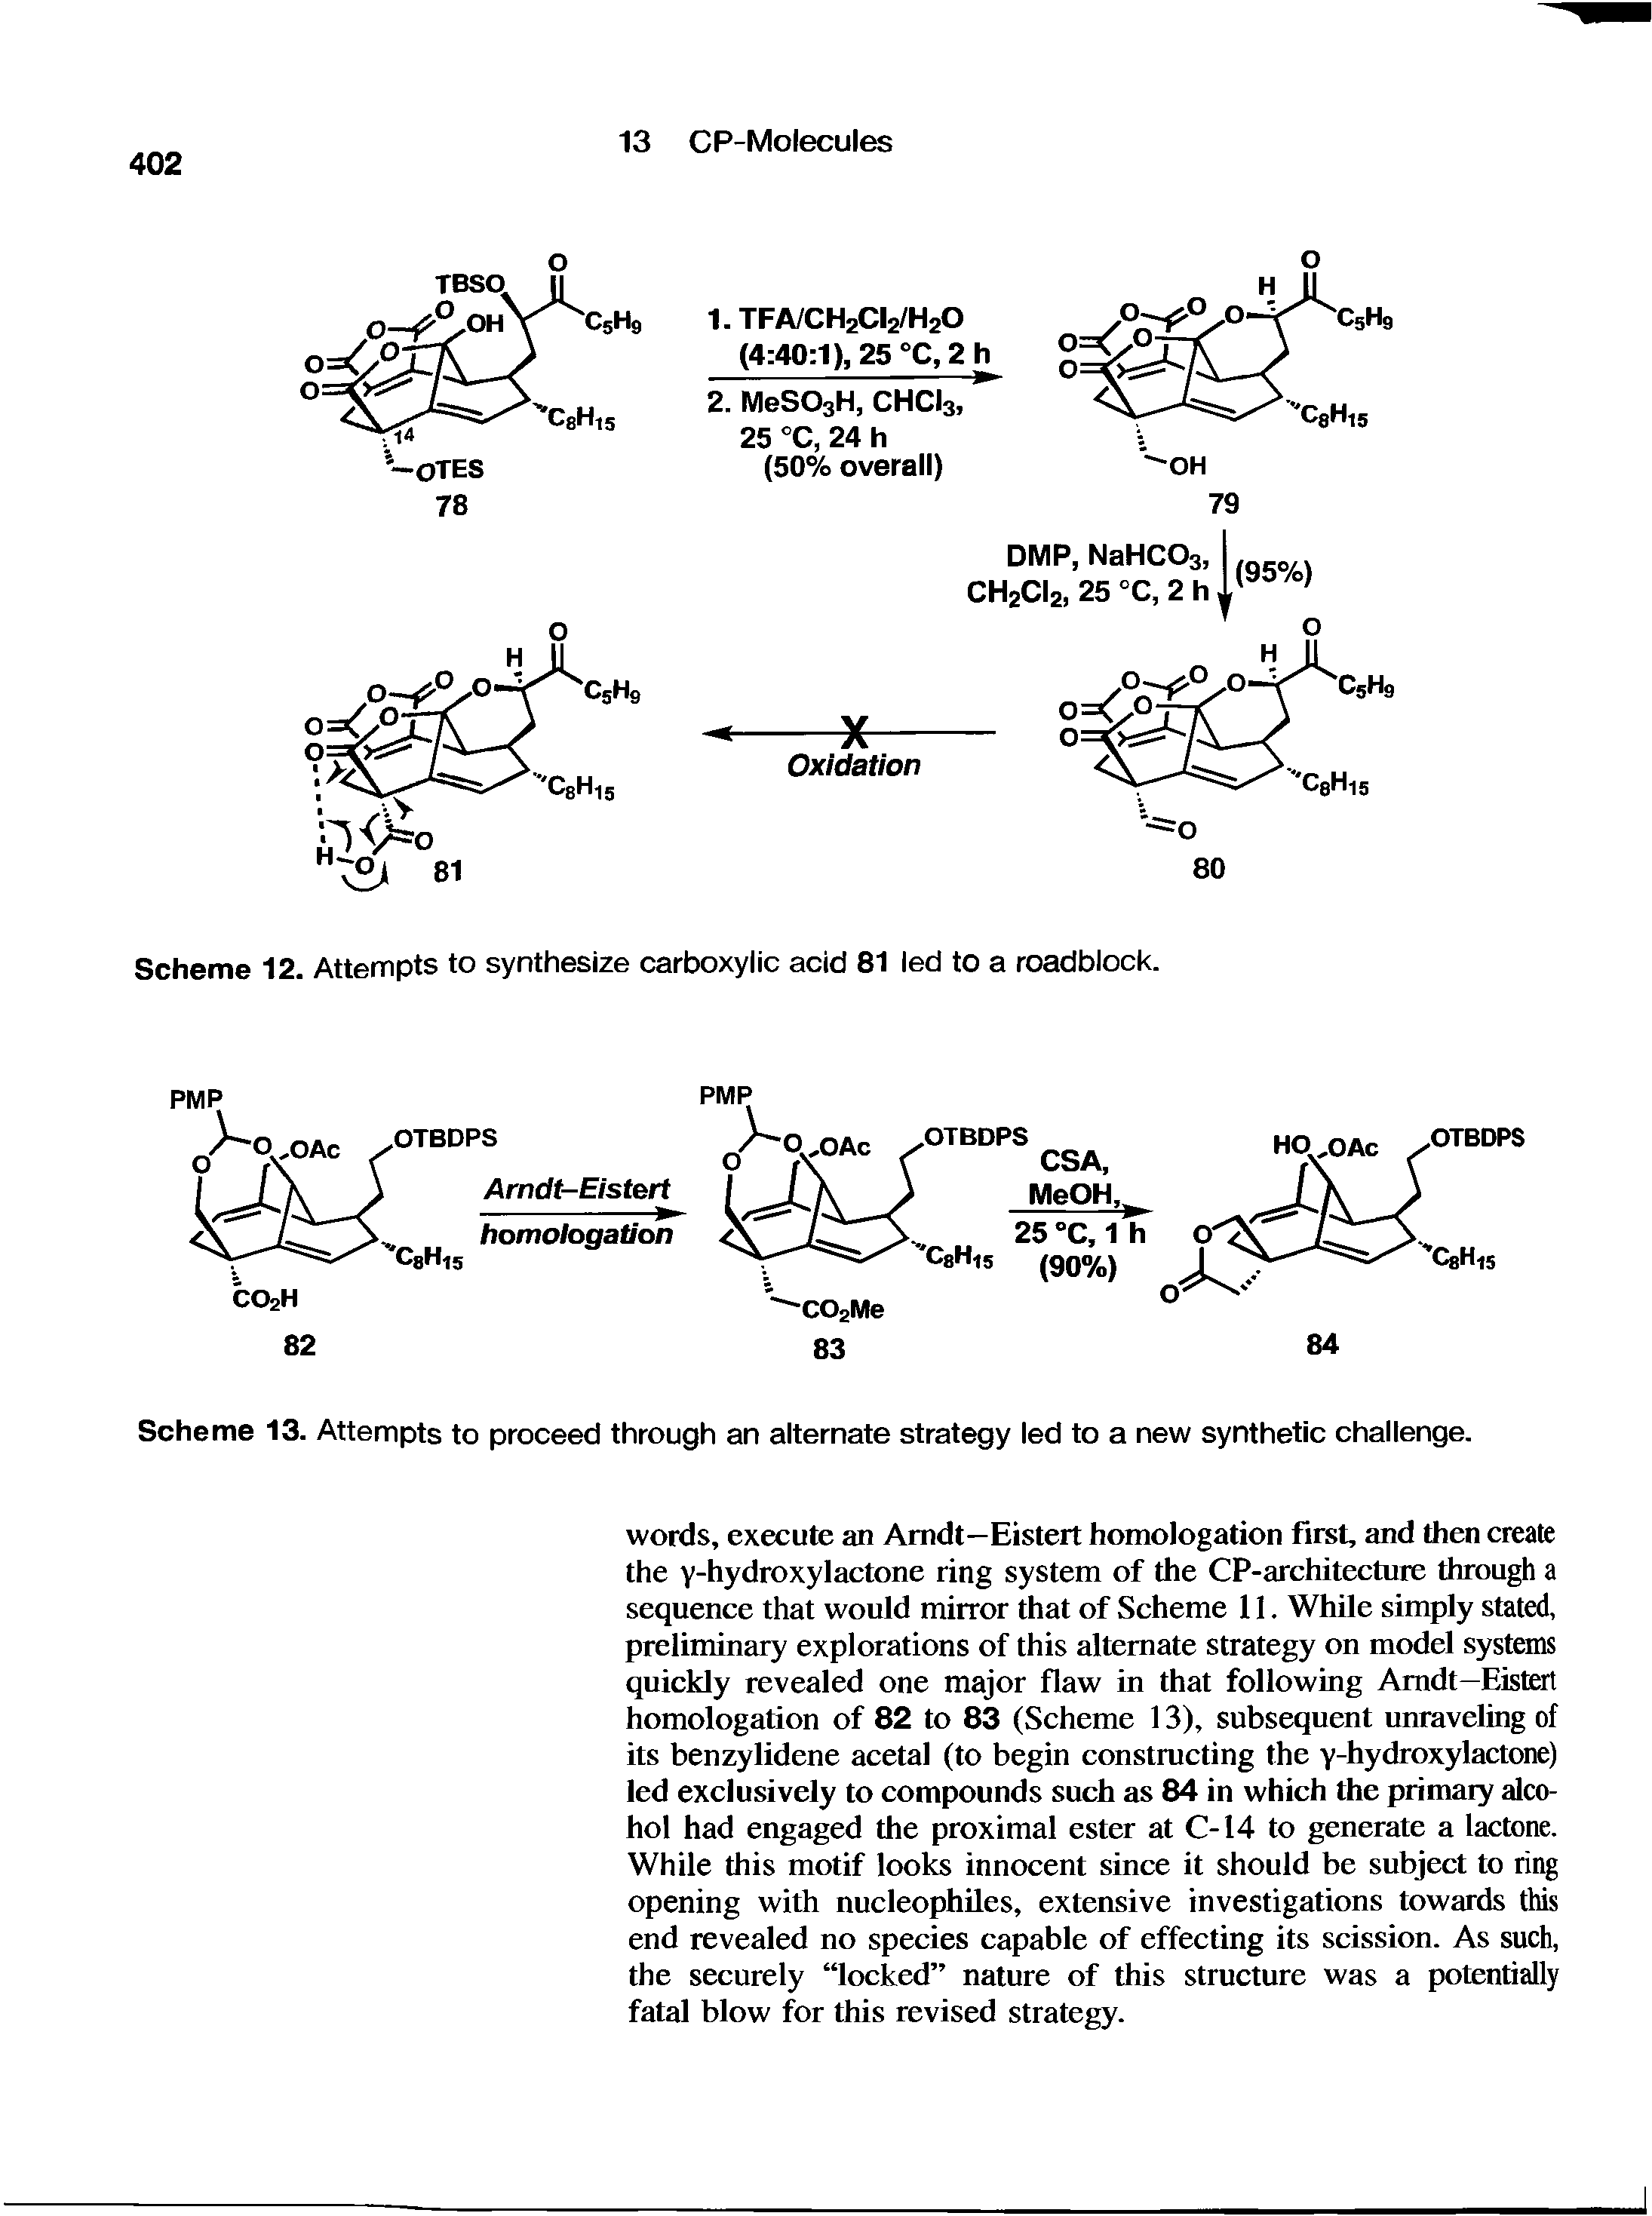 Scheme 12. Attempts to synthesize carboxylic acid 81 led to a roadblock.